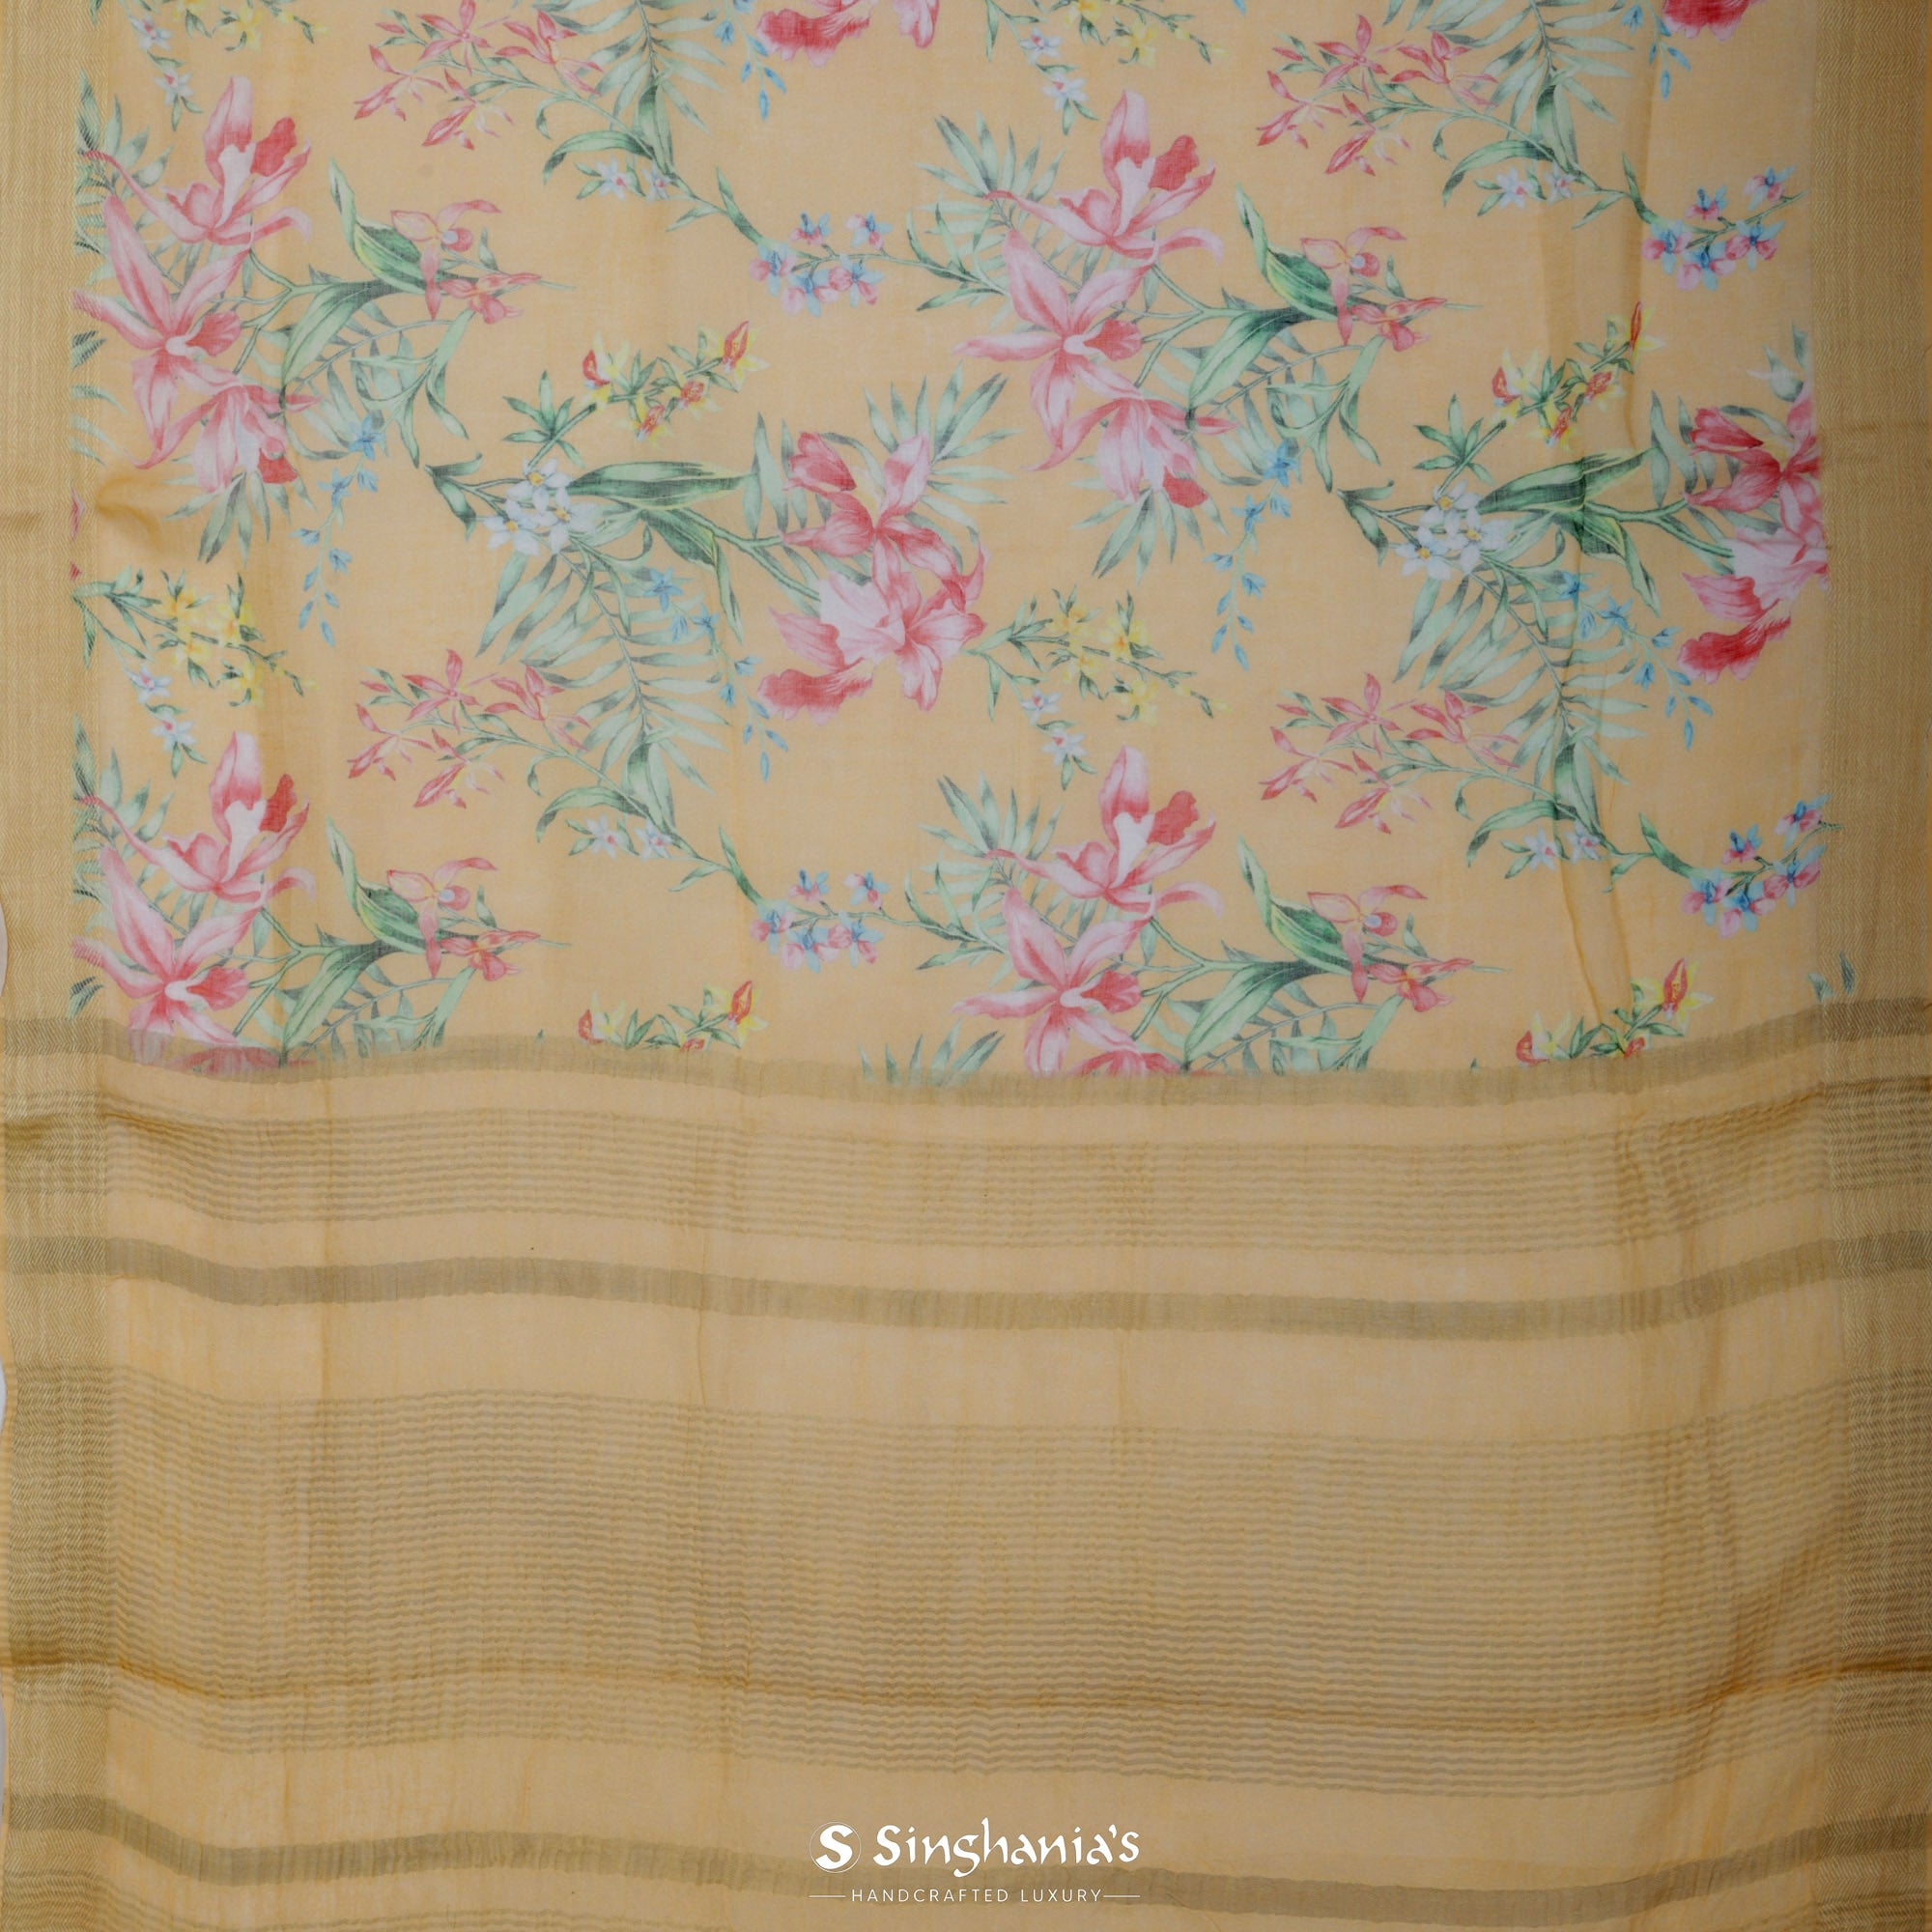 Retro Yellow Printed Linen Saree With Floral Jaal Design